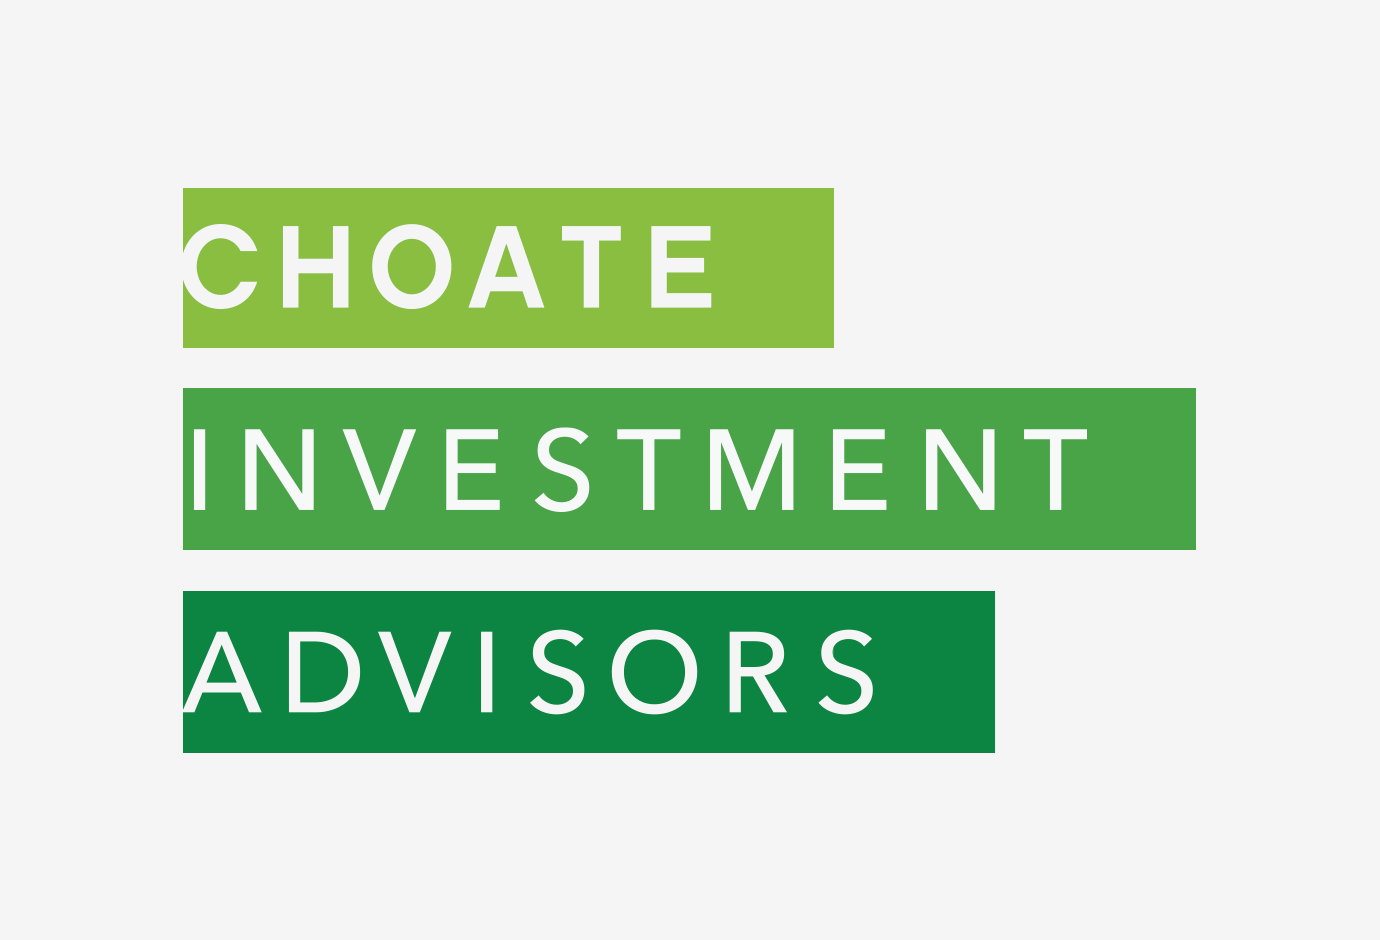 A GIF of the phrase "Choate IA" transforming into the full white type on stacked green bars Choate Investment Advisors logotype.